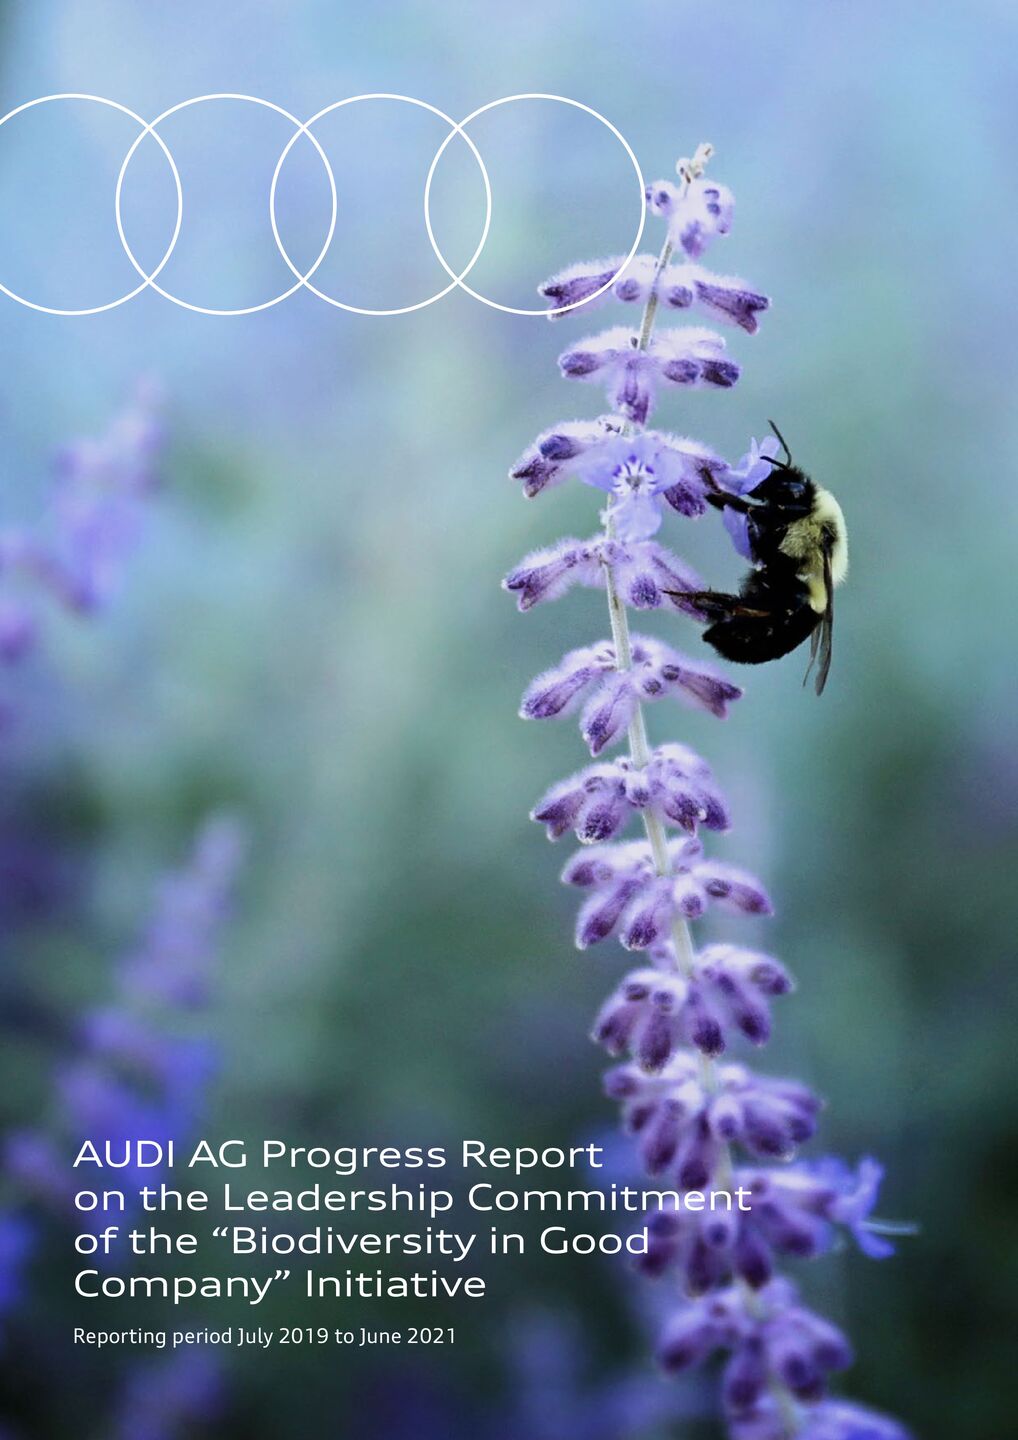 AUDI AG Progress Report on the Leadership Commitment of the “Biodiversity in Good Company” Initiative